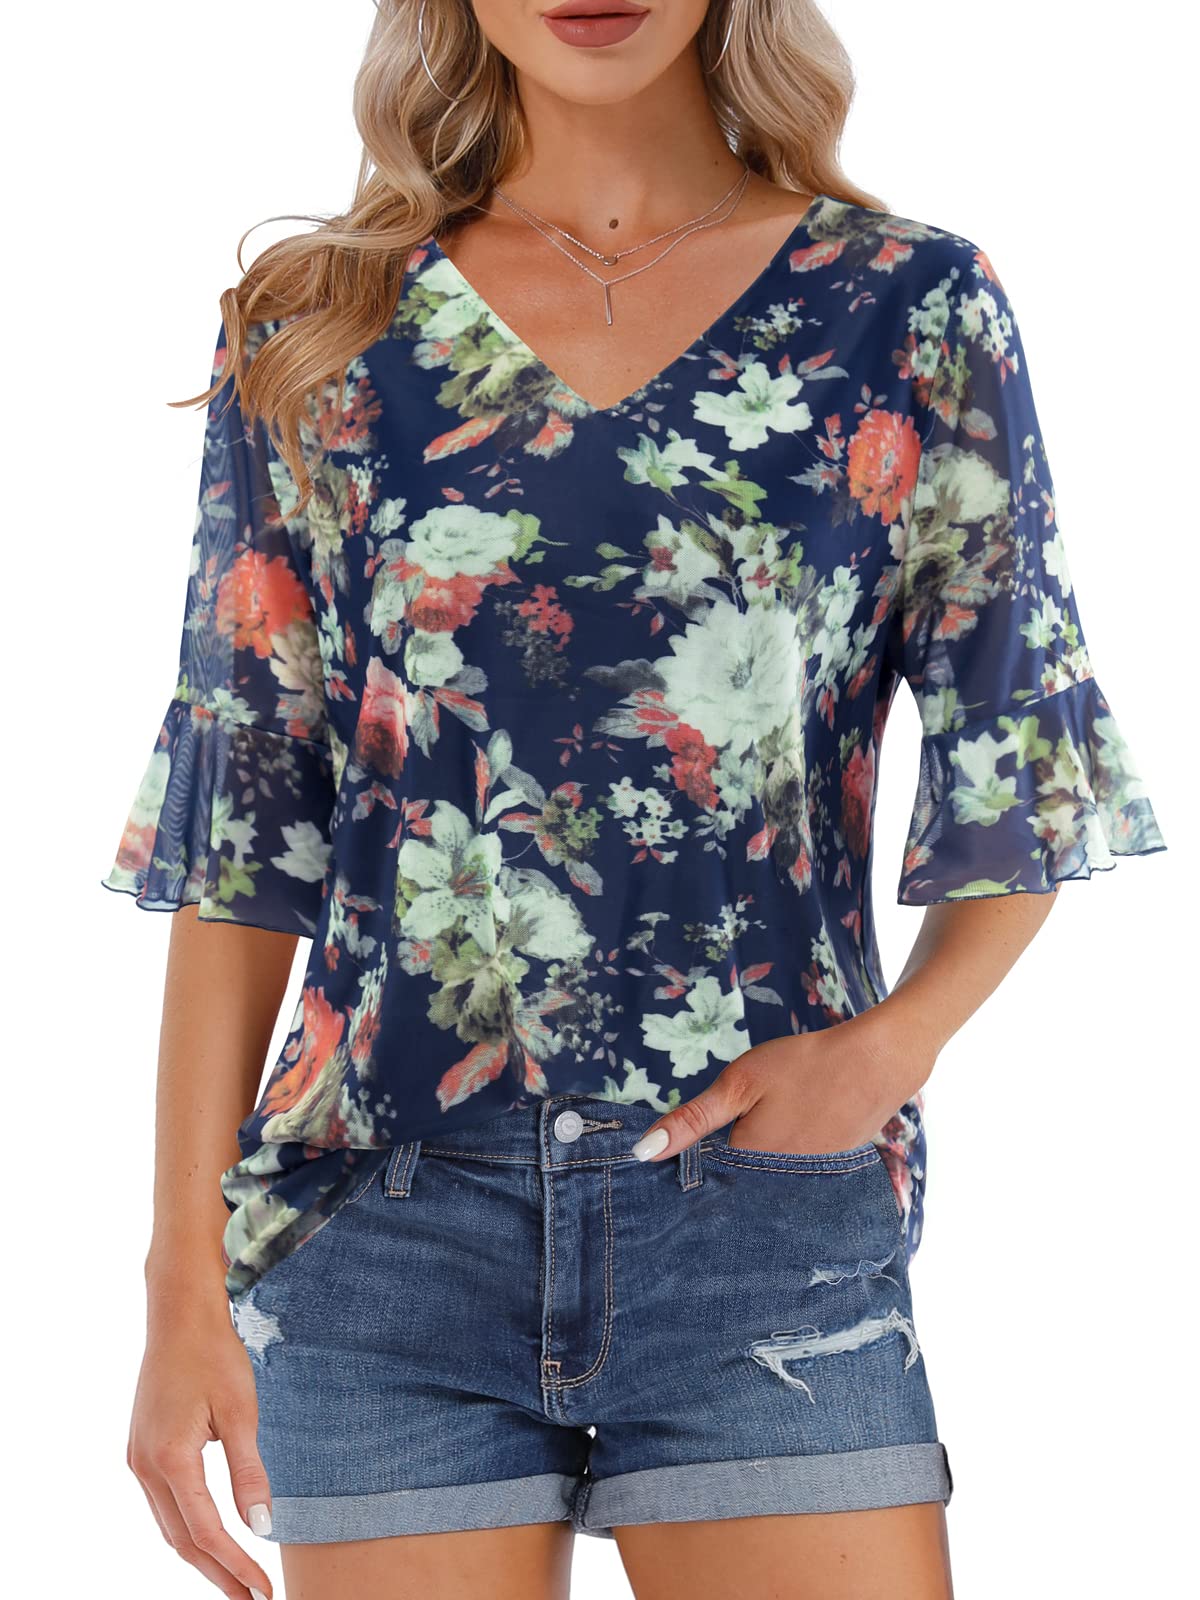 BAISHENGGT Blue Floral Women's Summer Casual V Neck Ruffle Bell Sleeve Blouse Tops Loose Comfy T Shirt